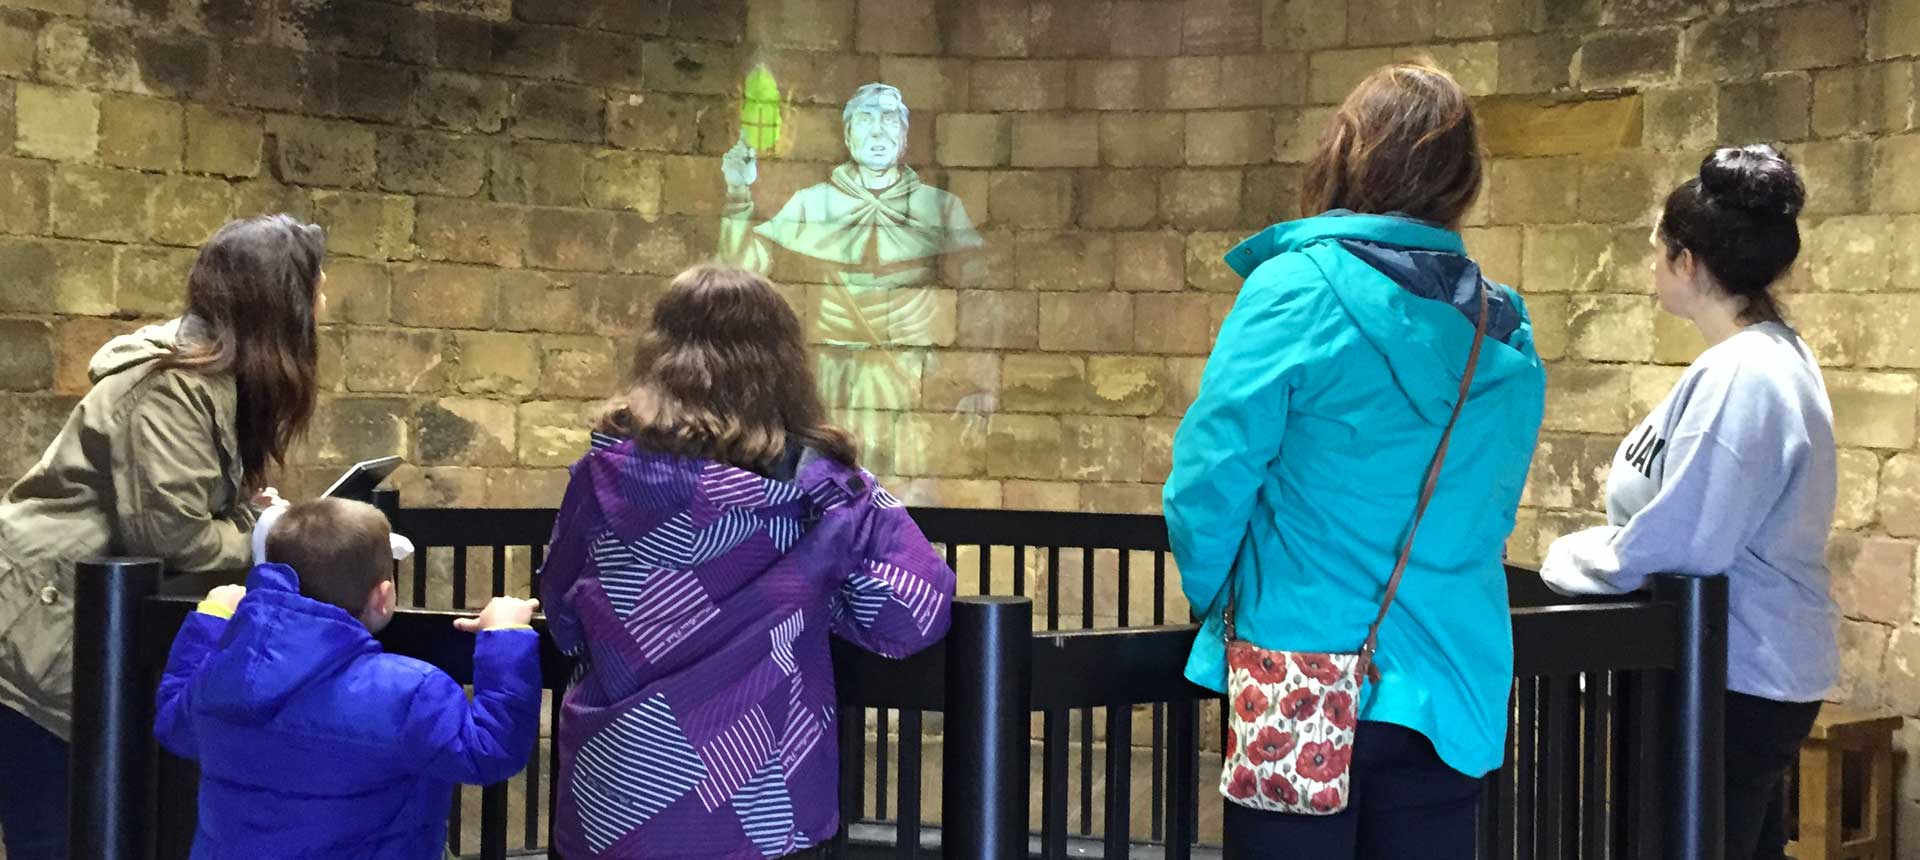 people looking at hologram on stone castle wall